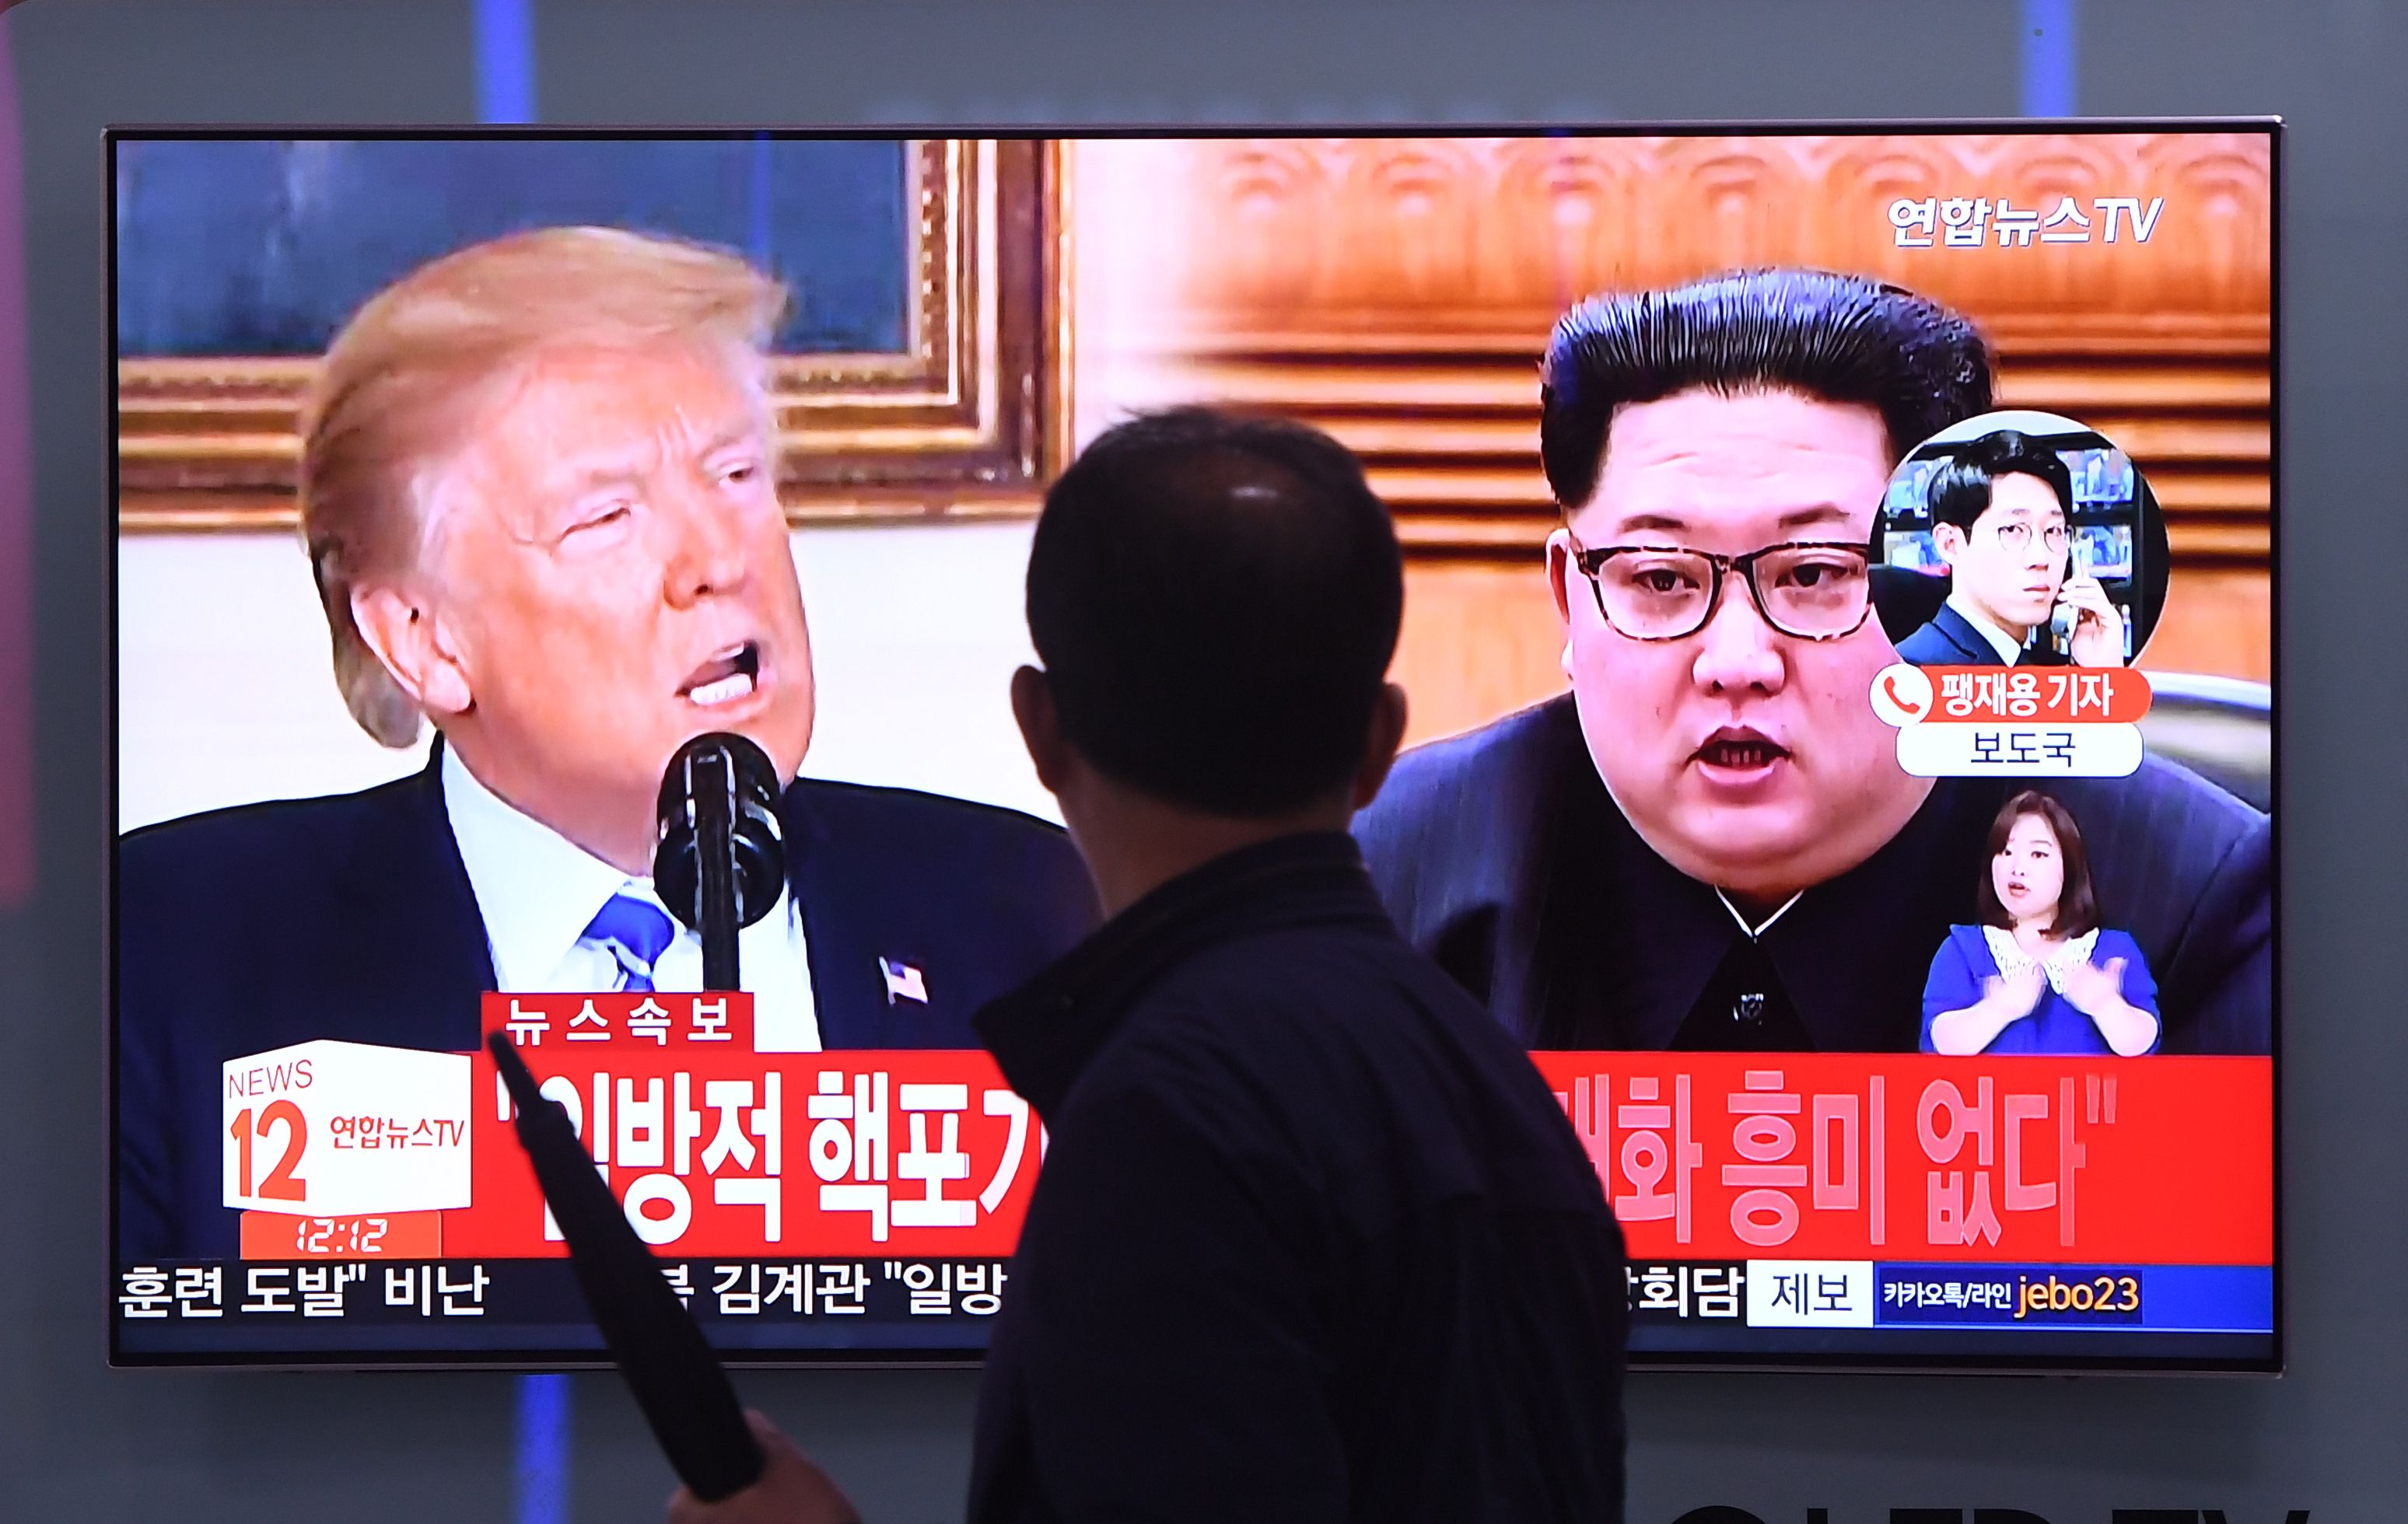 A man walks past a television news screen showing North Korean leader Kim Jong Un (R) and US President Donald Trump (L) at a railway station in Seoul on May 16, 2018. (JUNG YEON-JE—AFP/Getty Images)